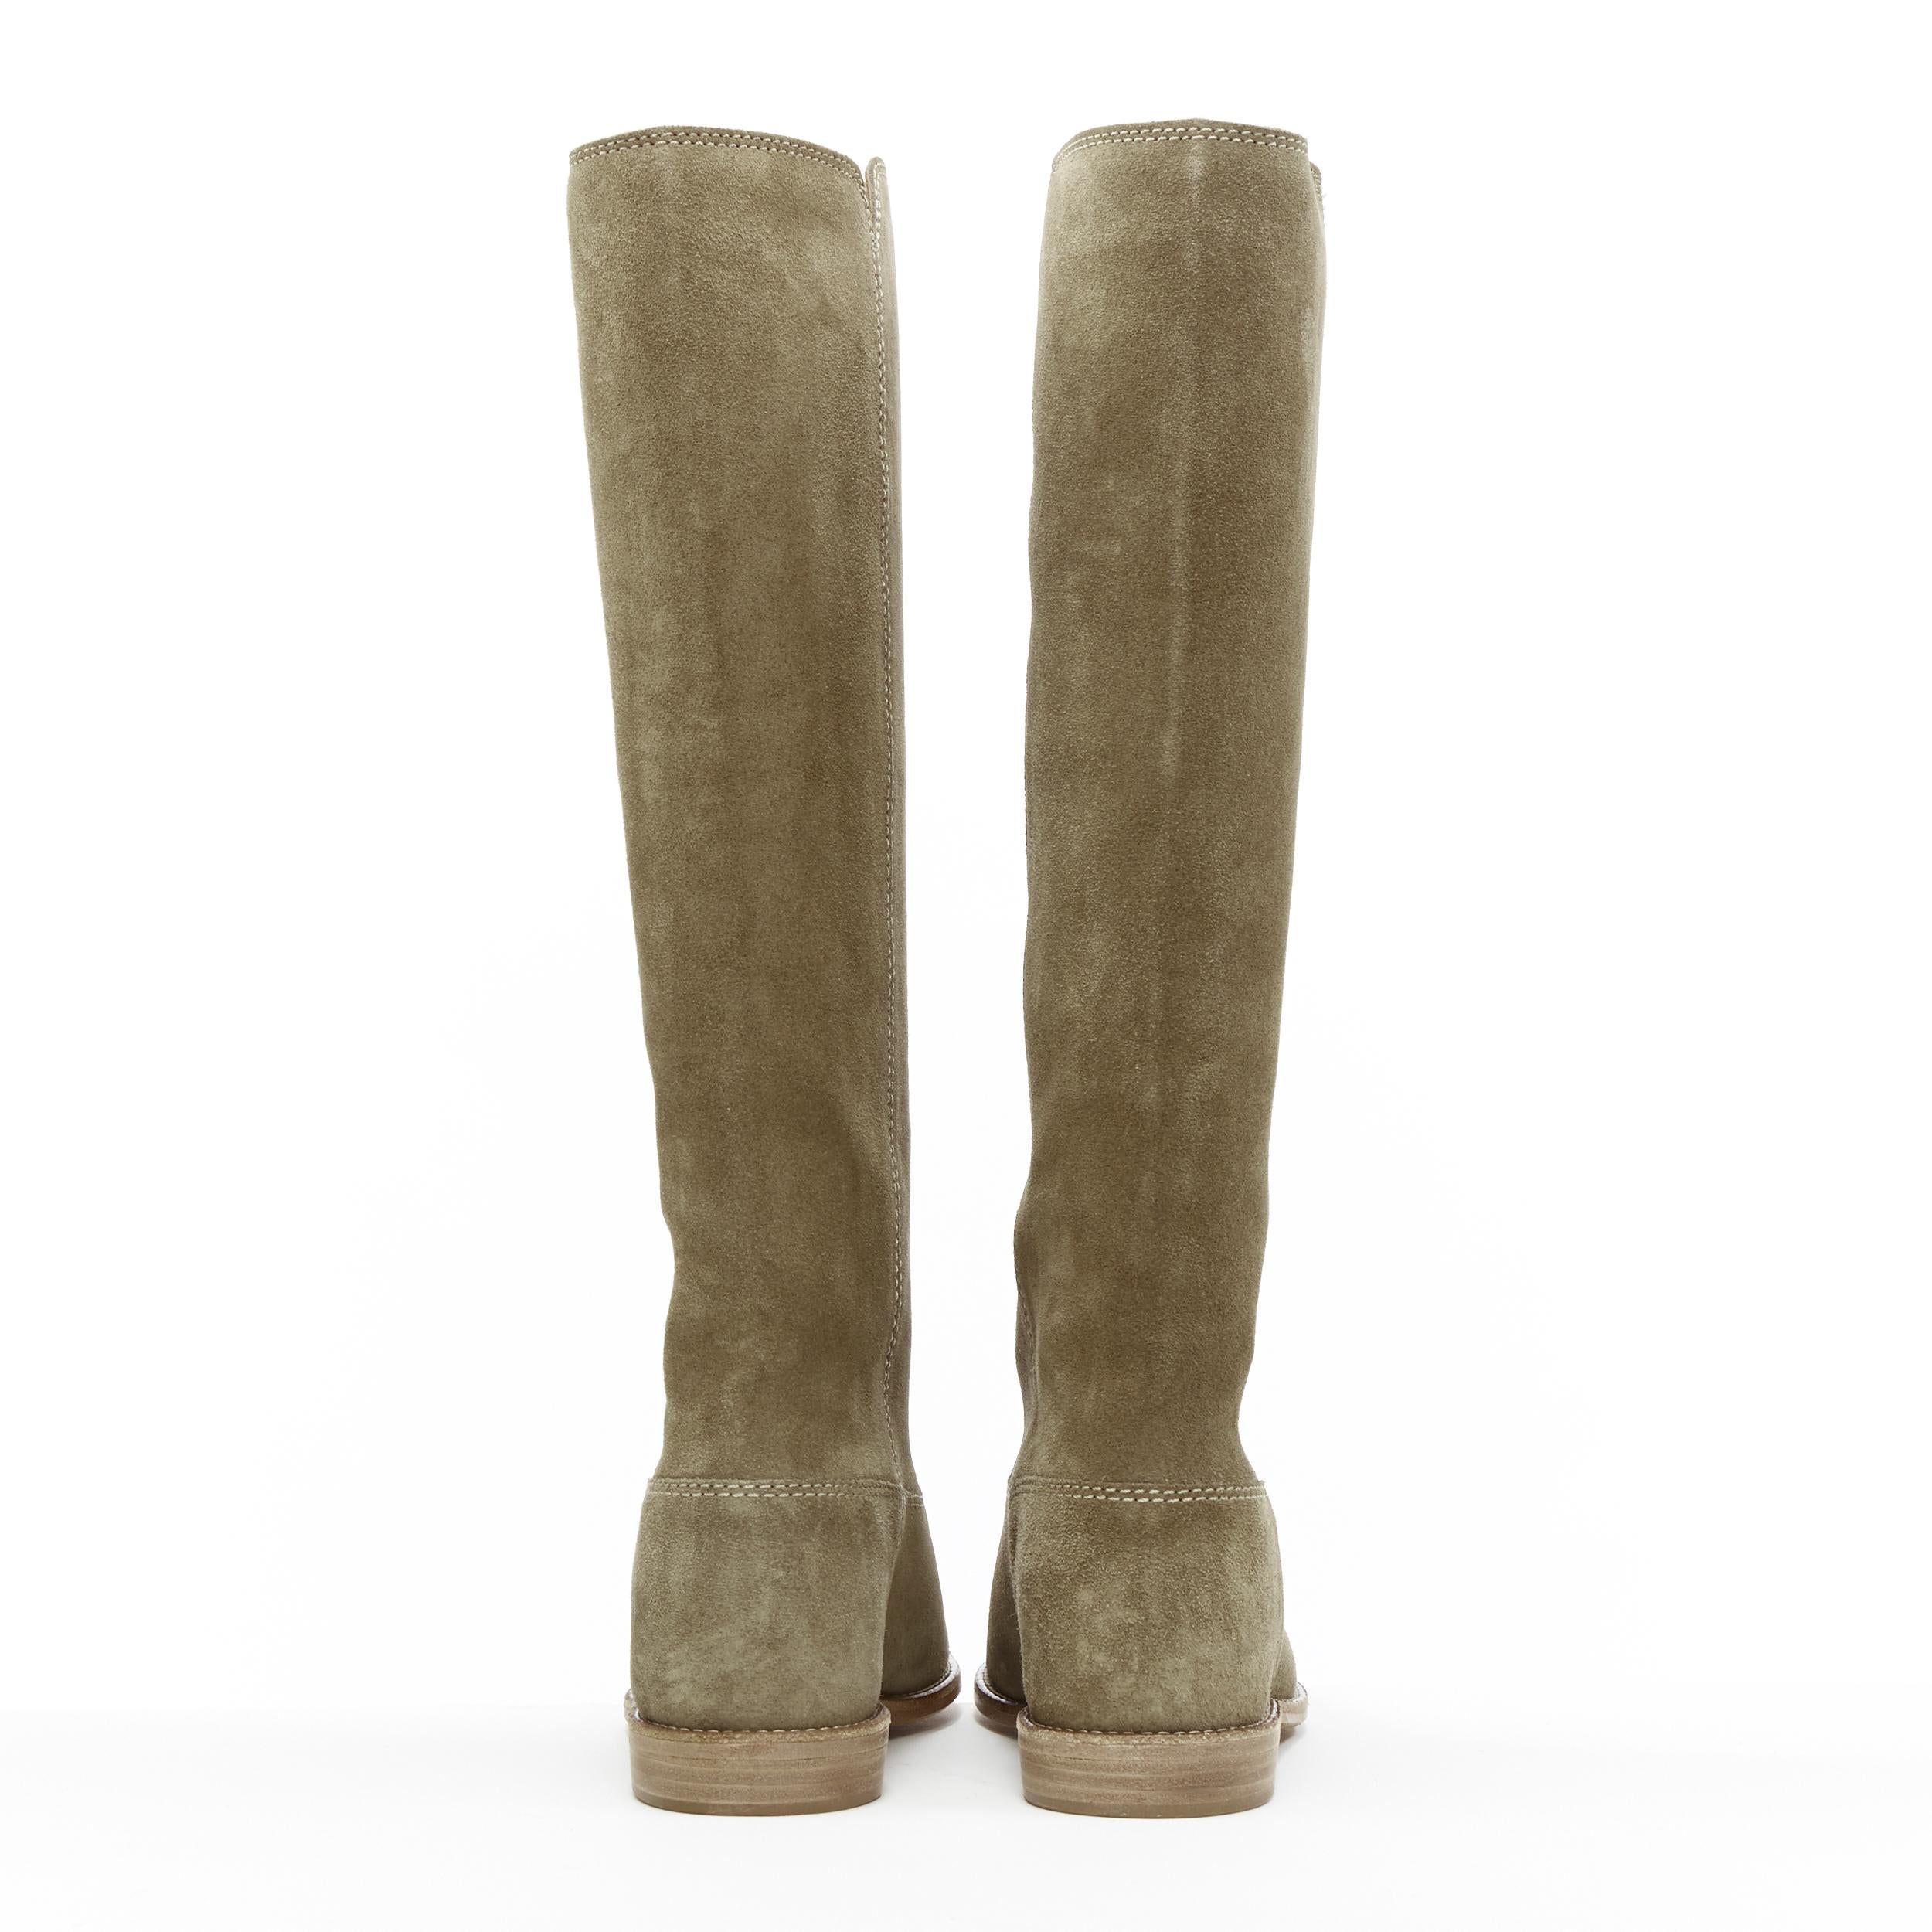 Brown new ISABEL MARANT Cleave Taupe suede concealed wedge knee high western boot EU35